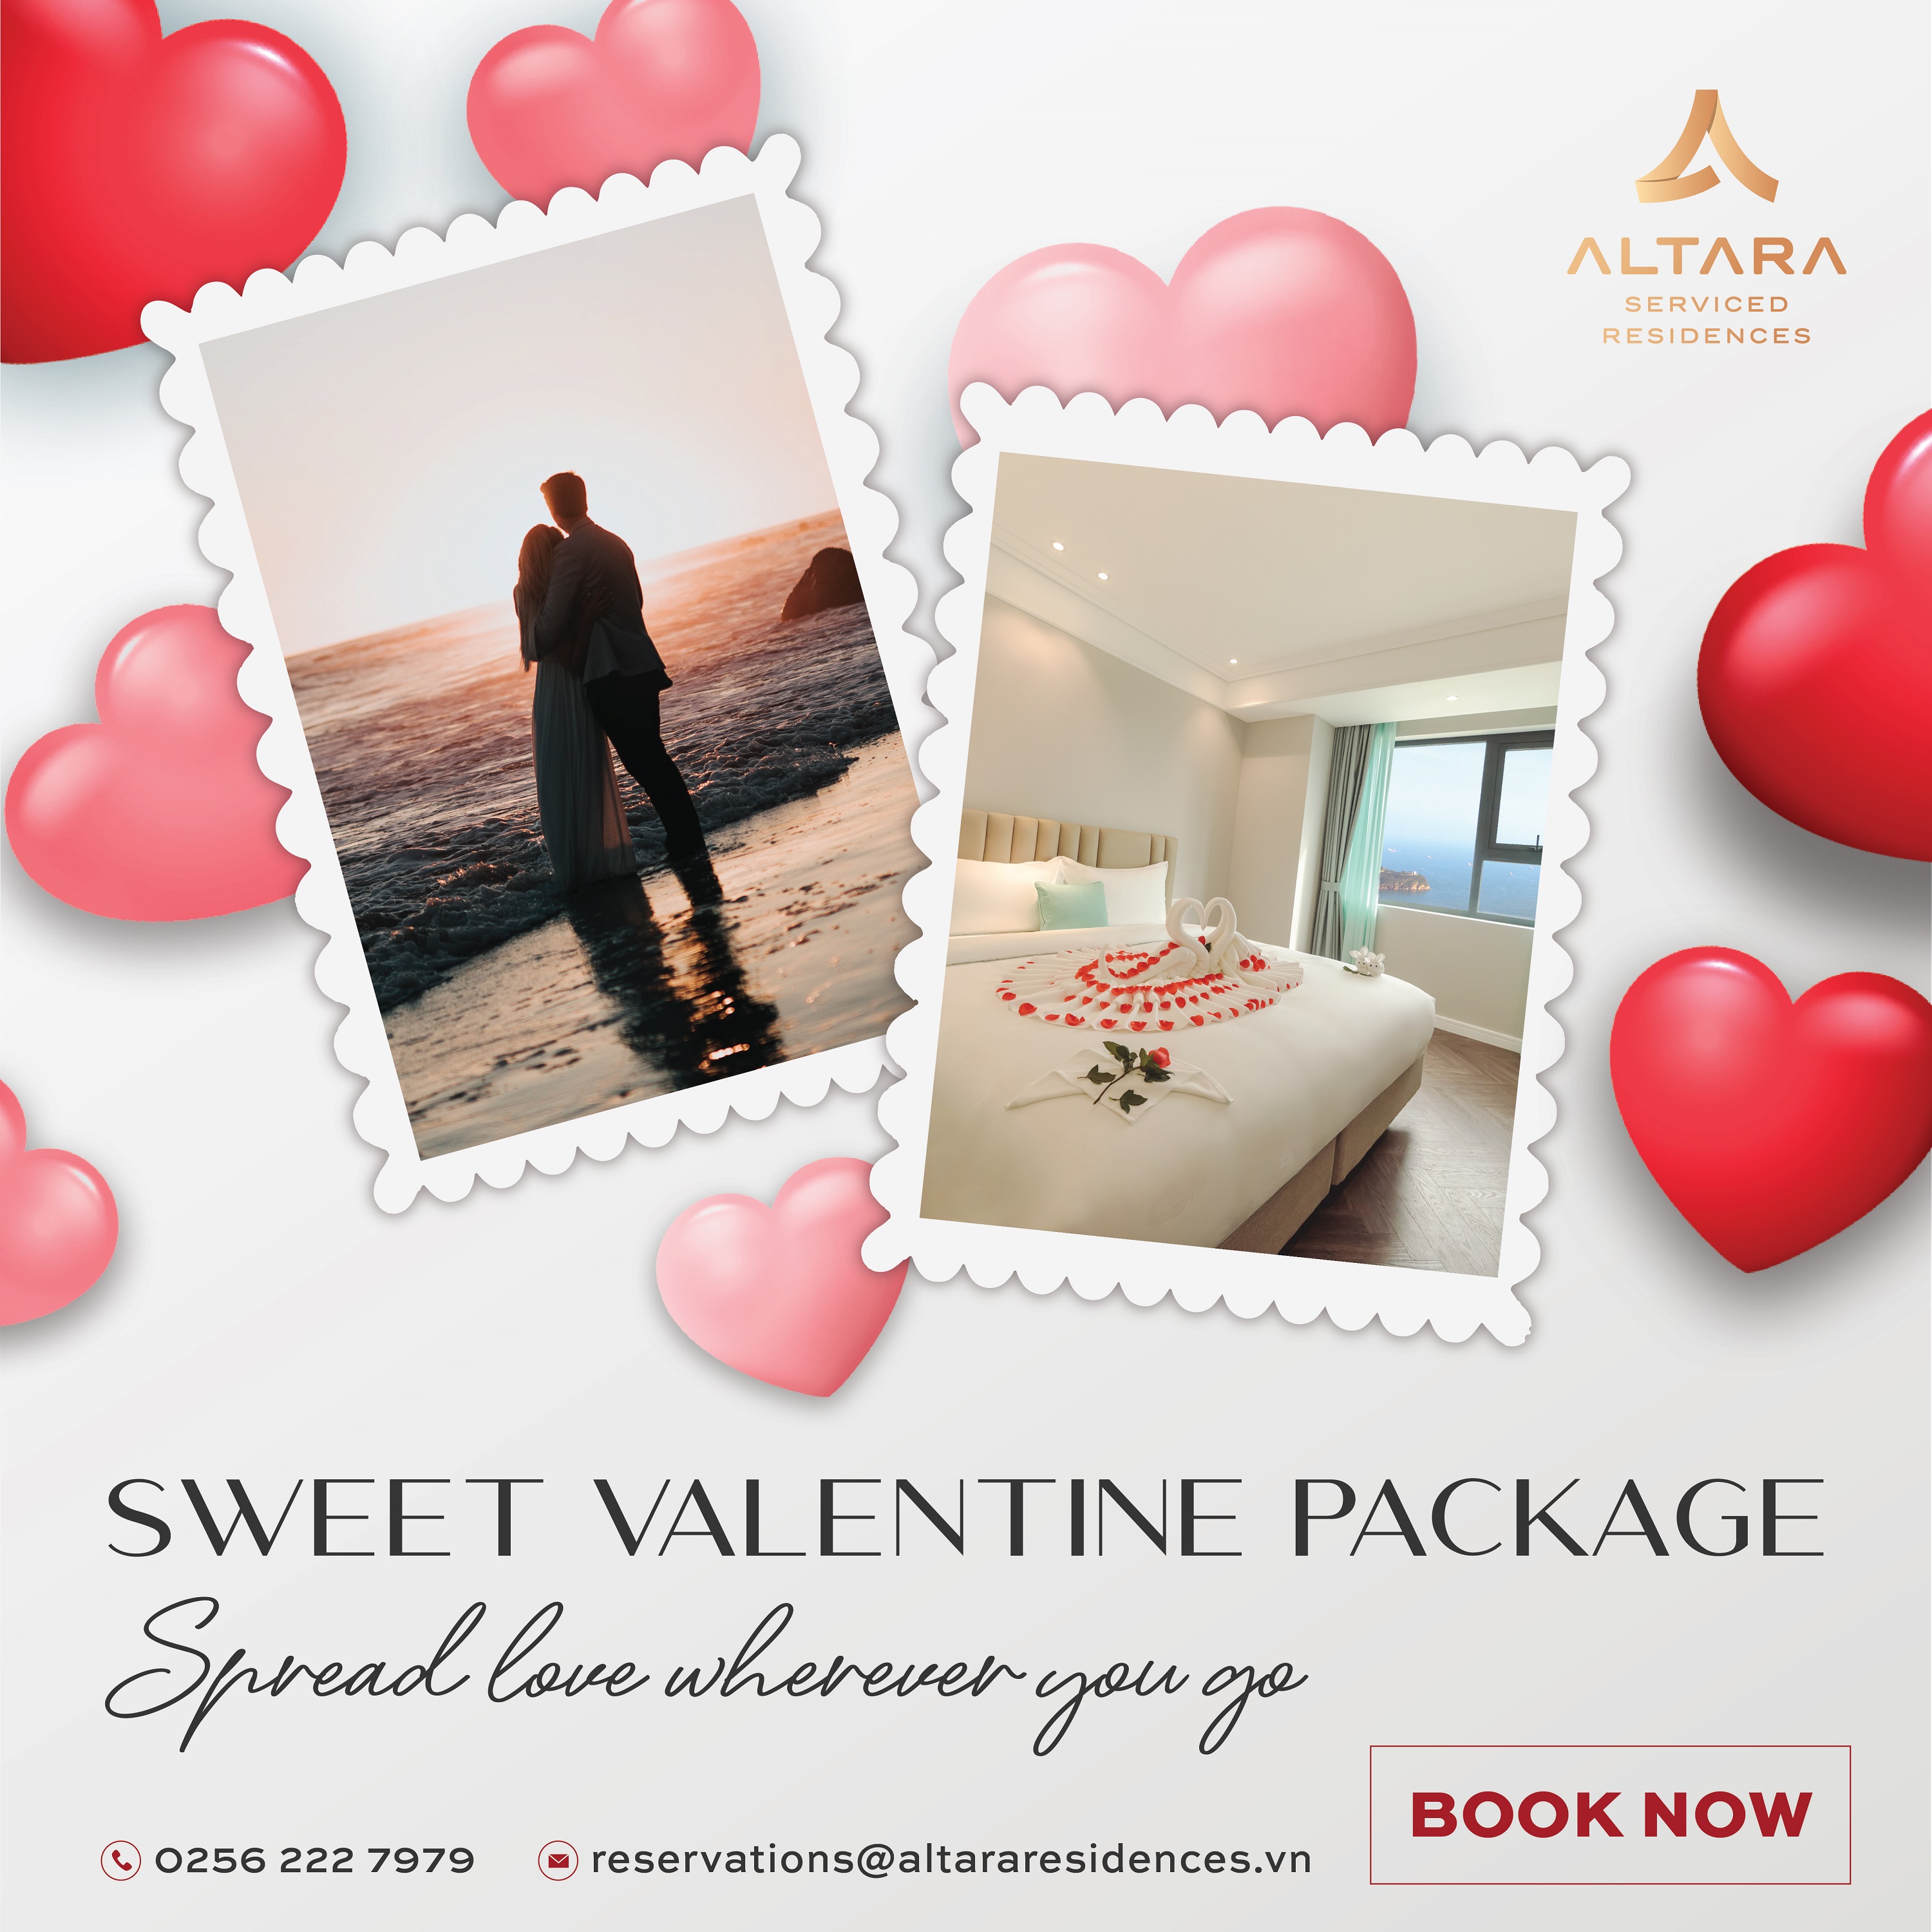 Treat your special someone to a romantic escape at Altara Serviced Residences this Valentine's Day!